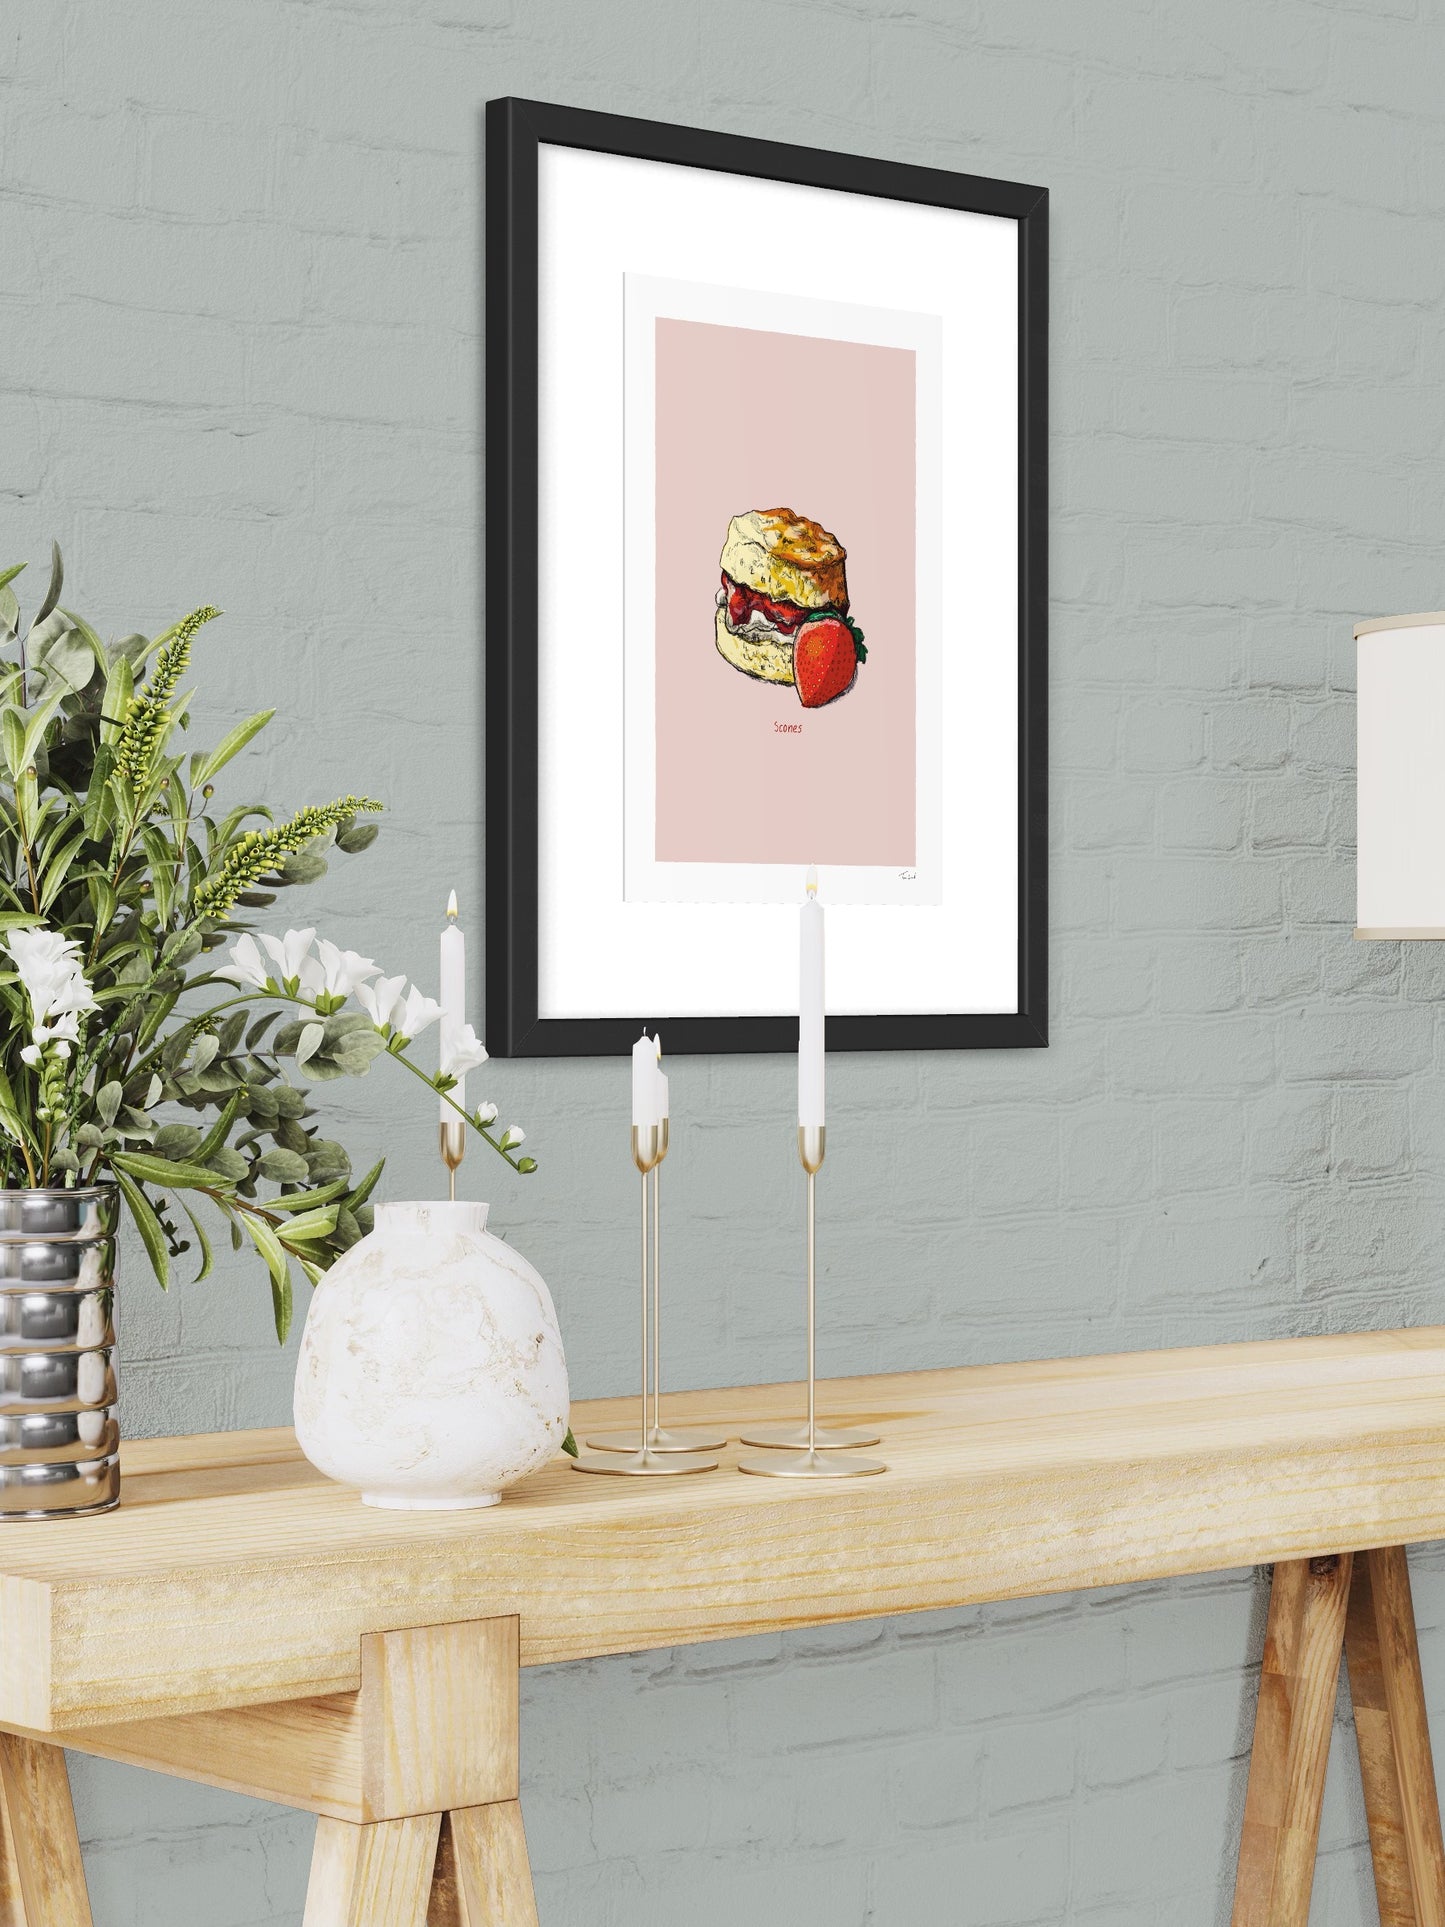 This image shows a giclee wall art print by Tom Laird Illustration of a Scone, framed in a beautiful living room with tasteful modern home decor. This art print is available from Tom Laird Illustration in various sizes.